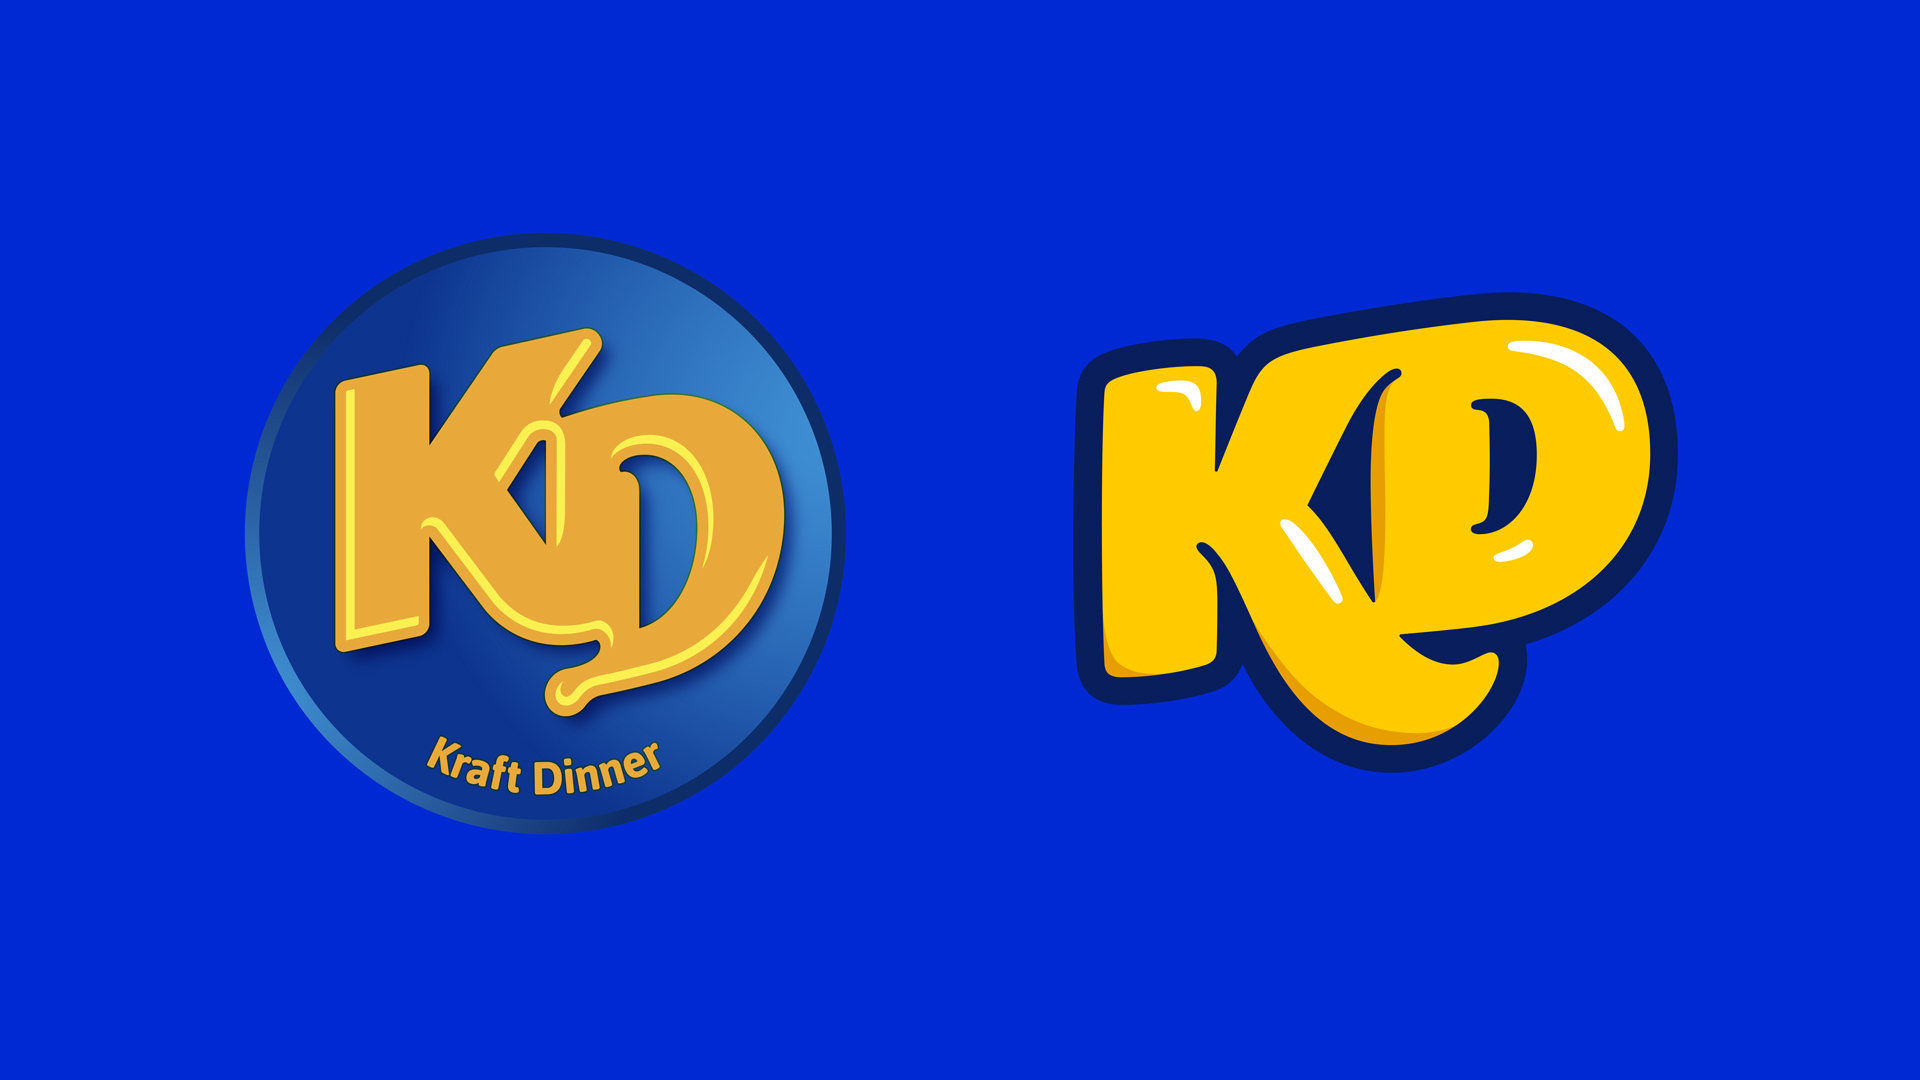 Cheesy logo redesign for KD.